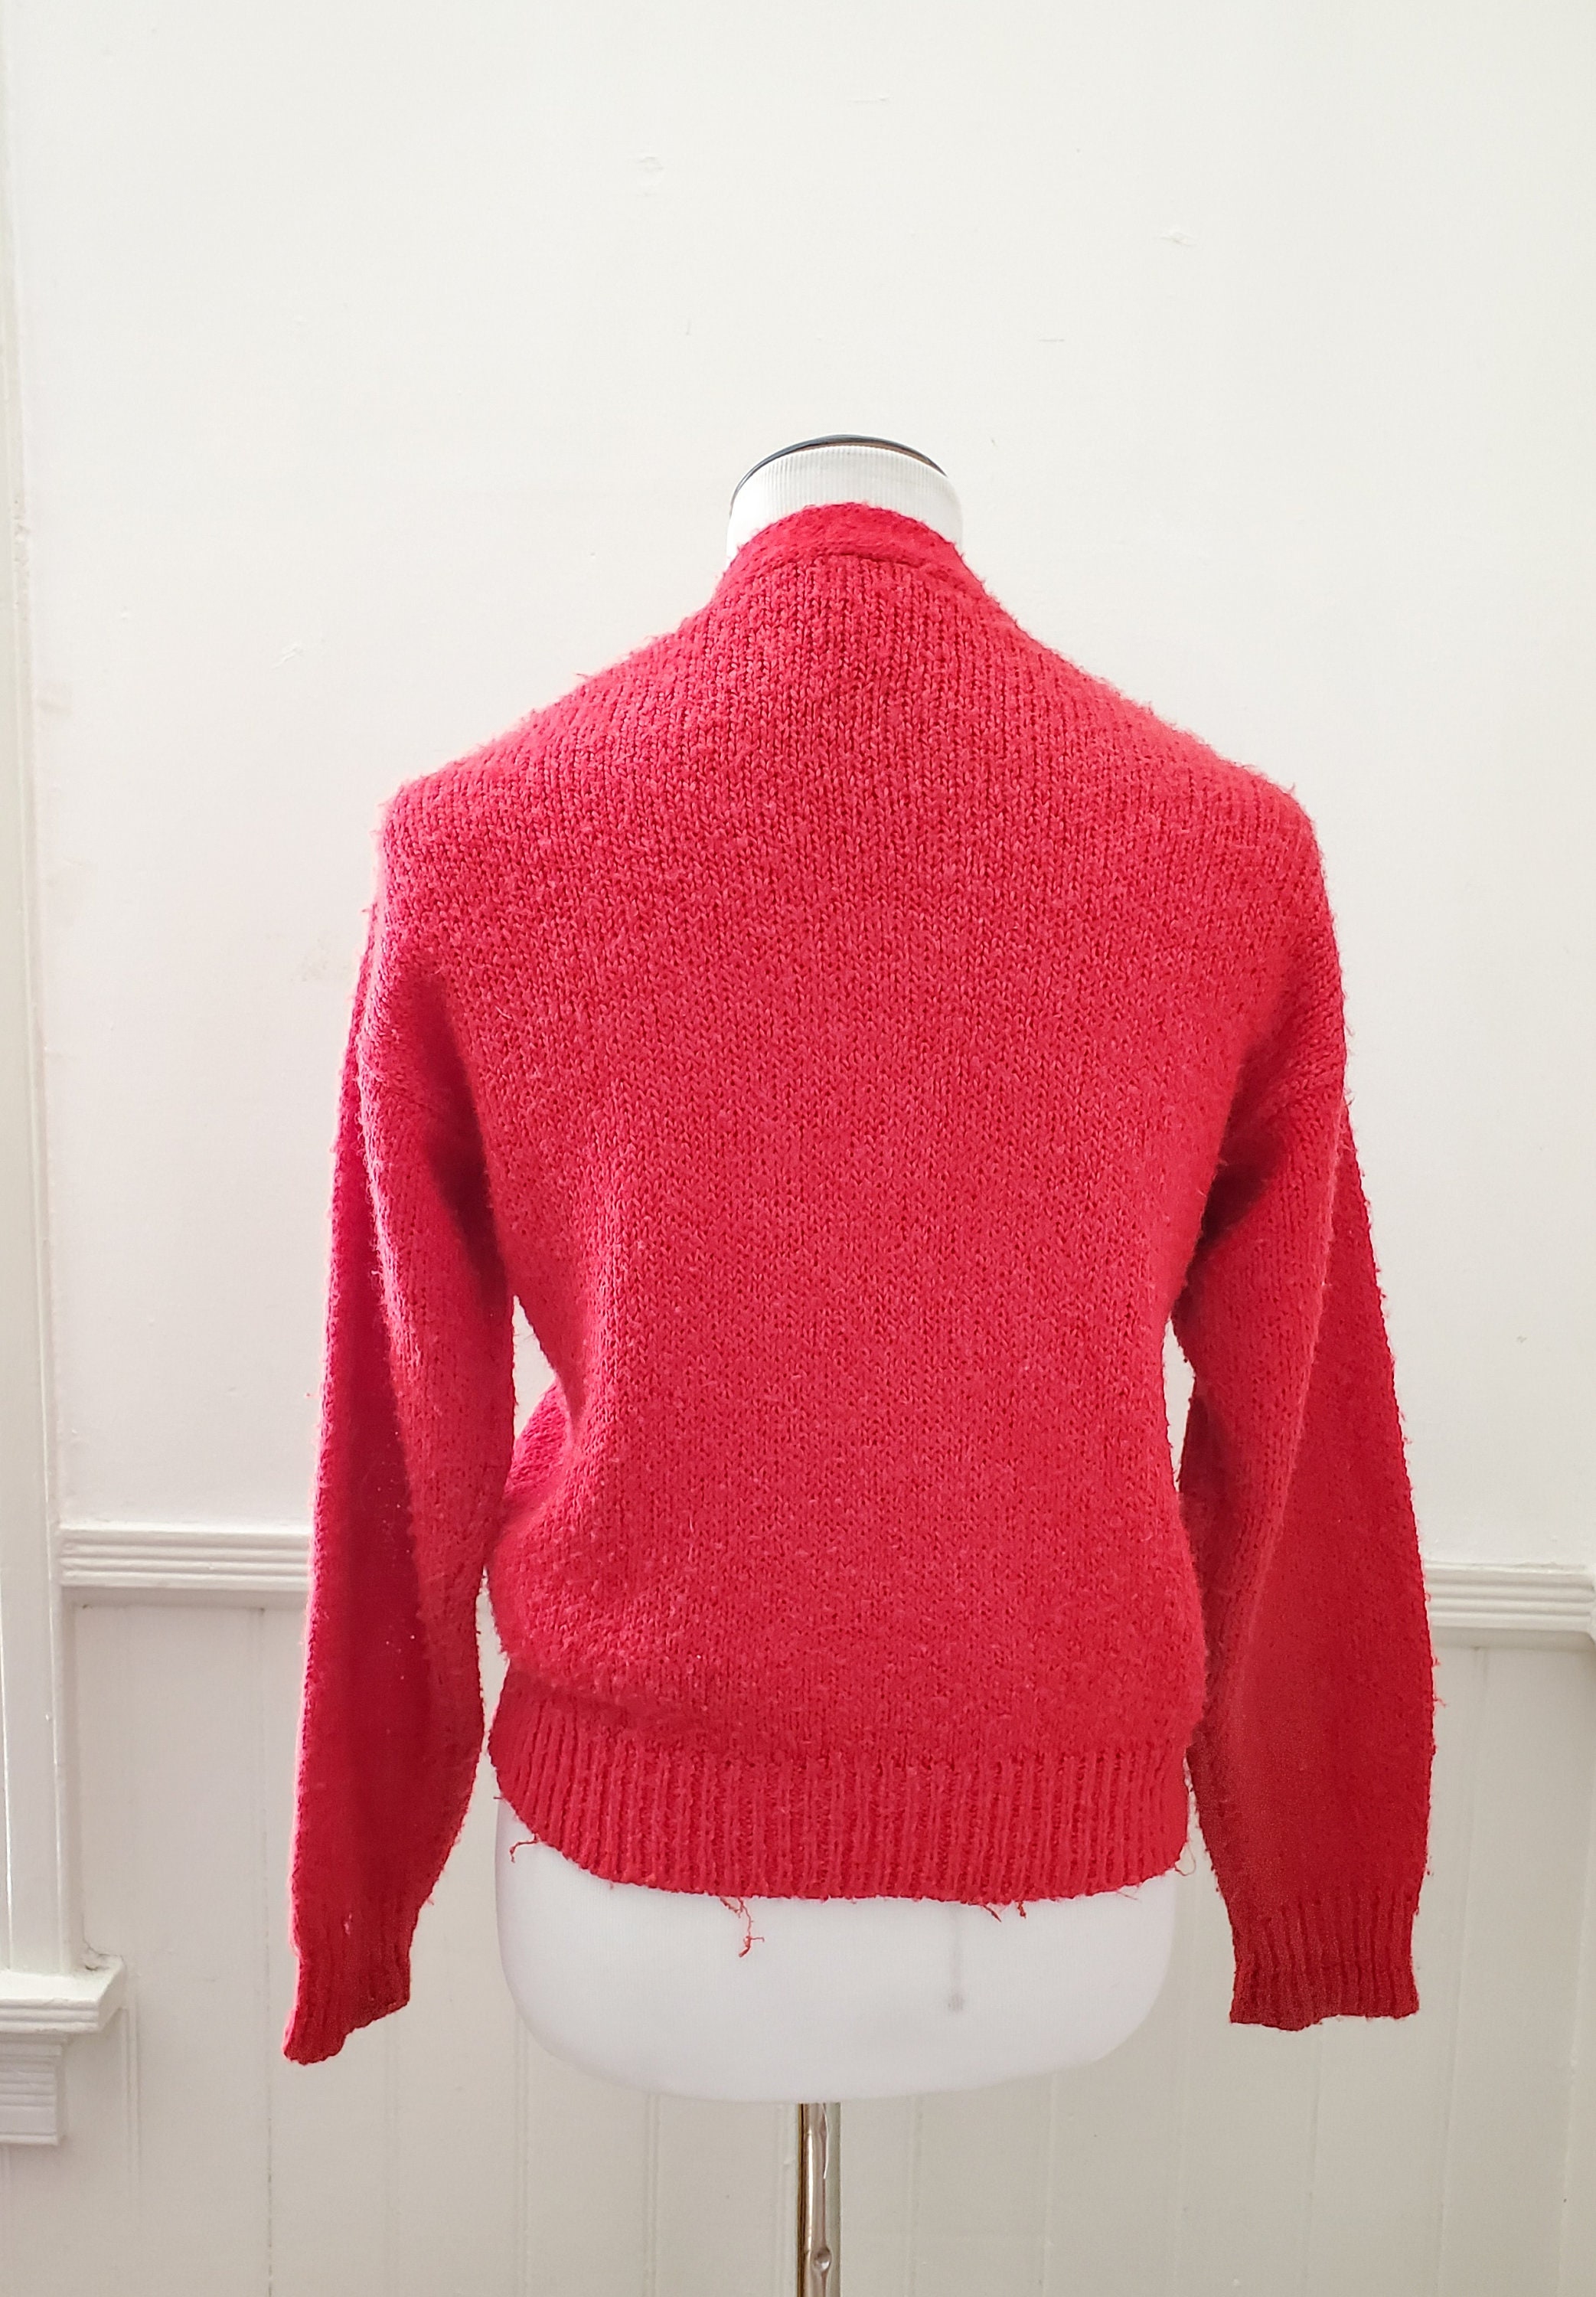 Vintage 1980s Cherry Red Small Cardigan Sweater by Victoria | Etsy